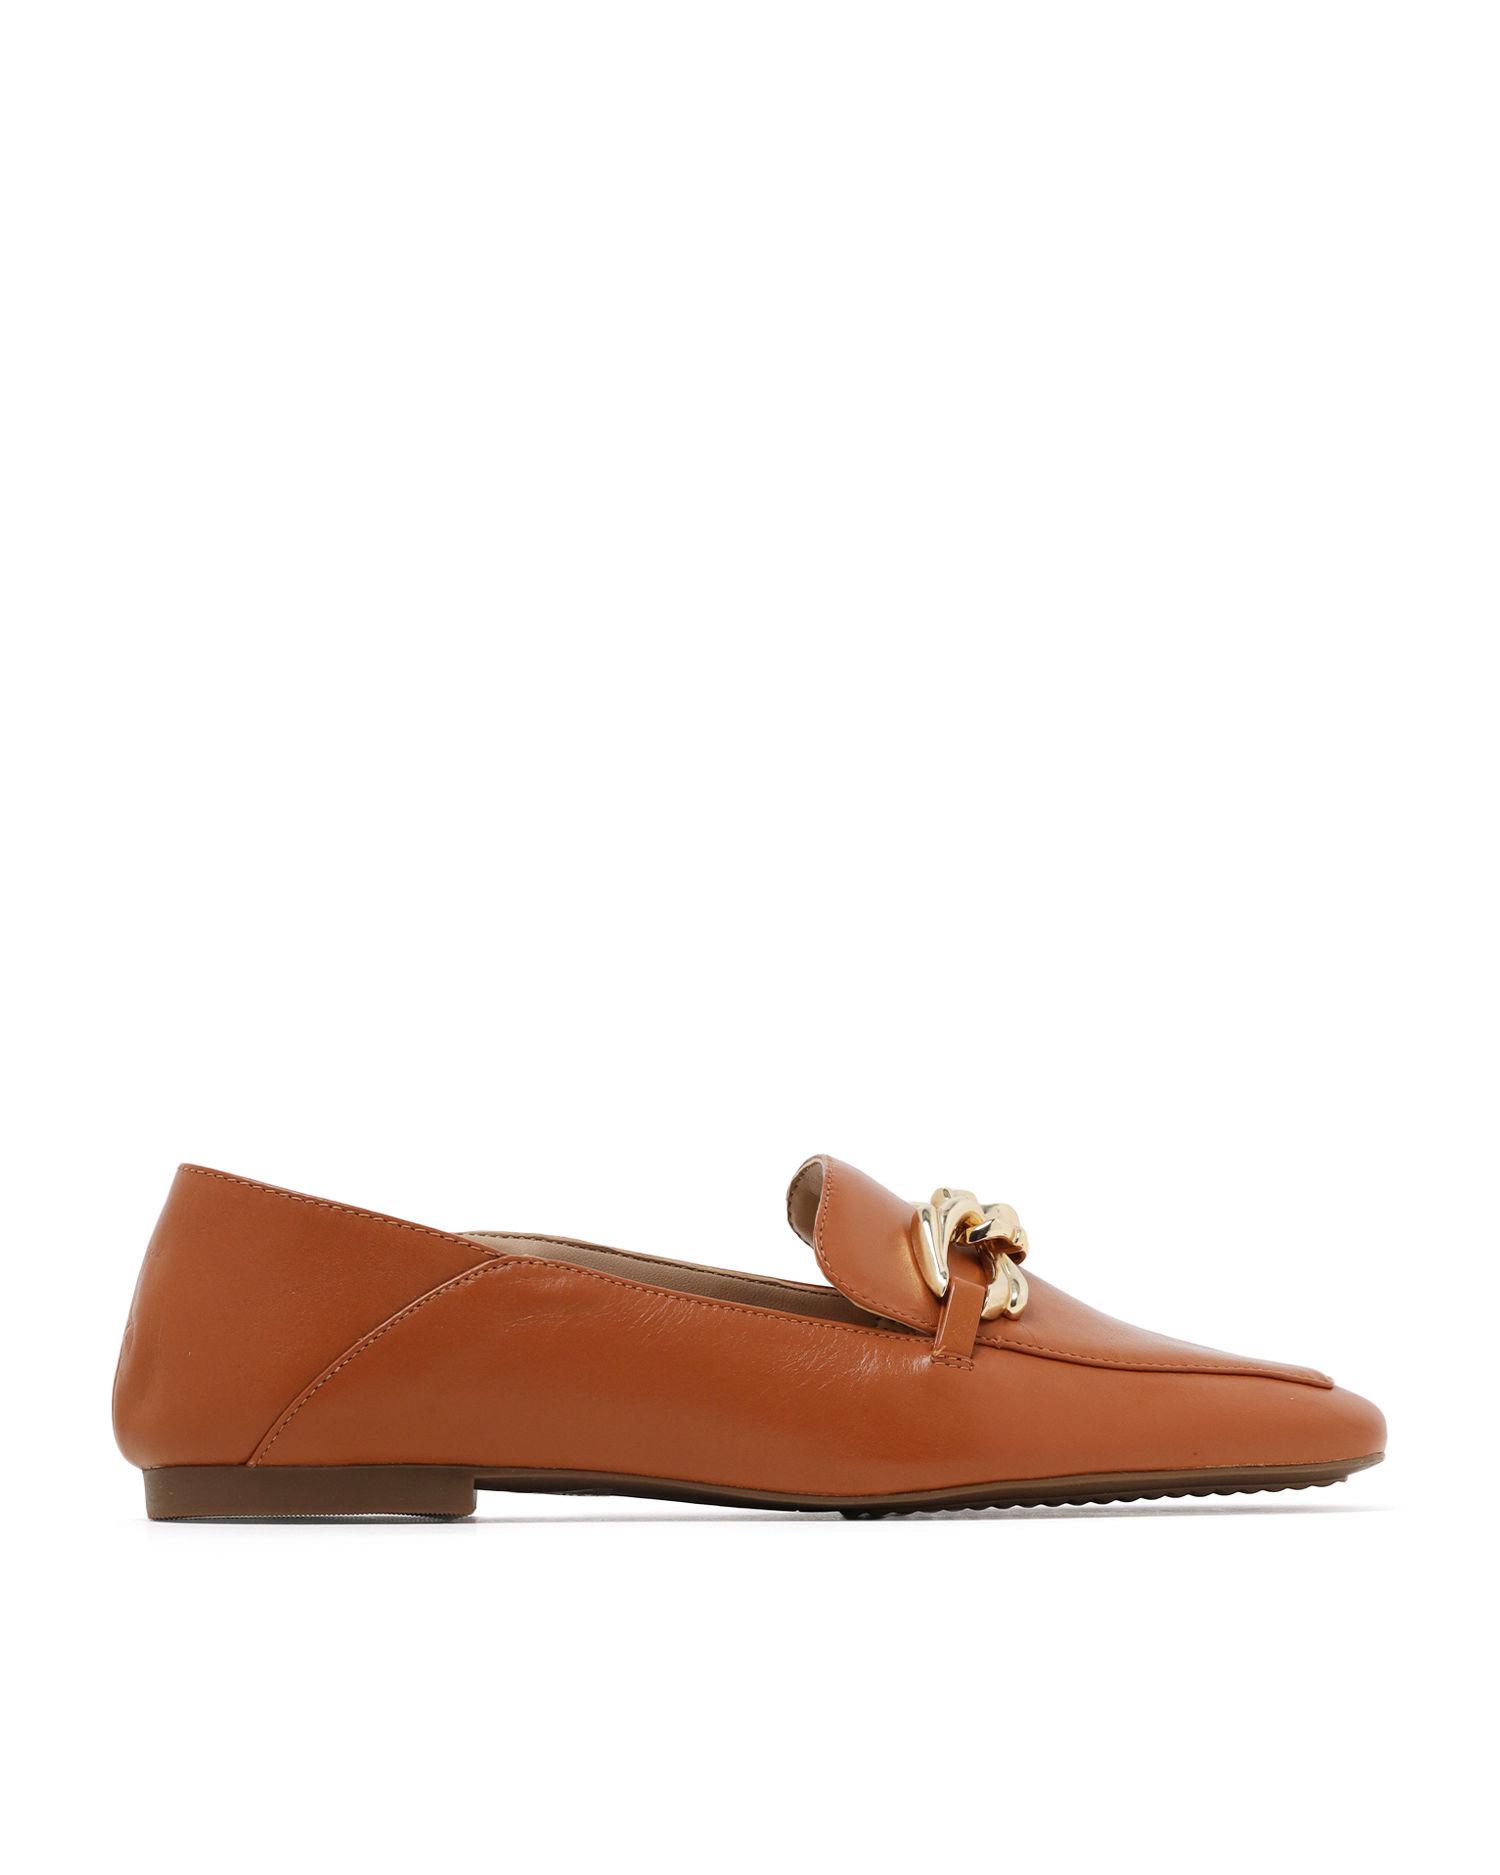 Chained loafer flats by AREZZO